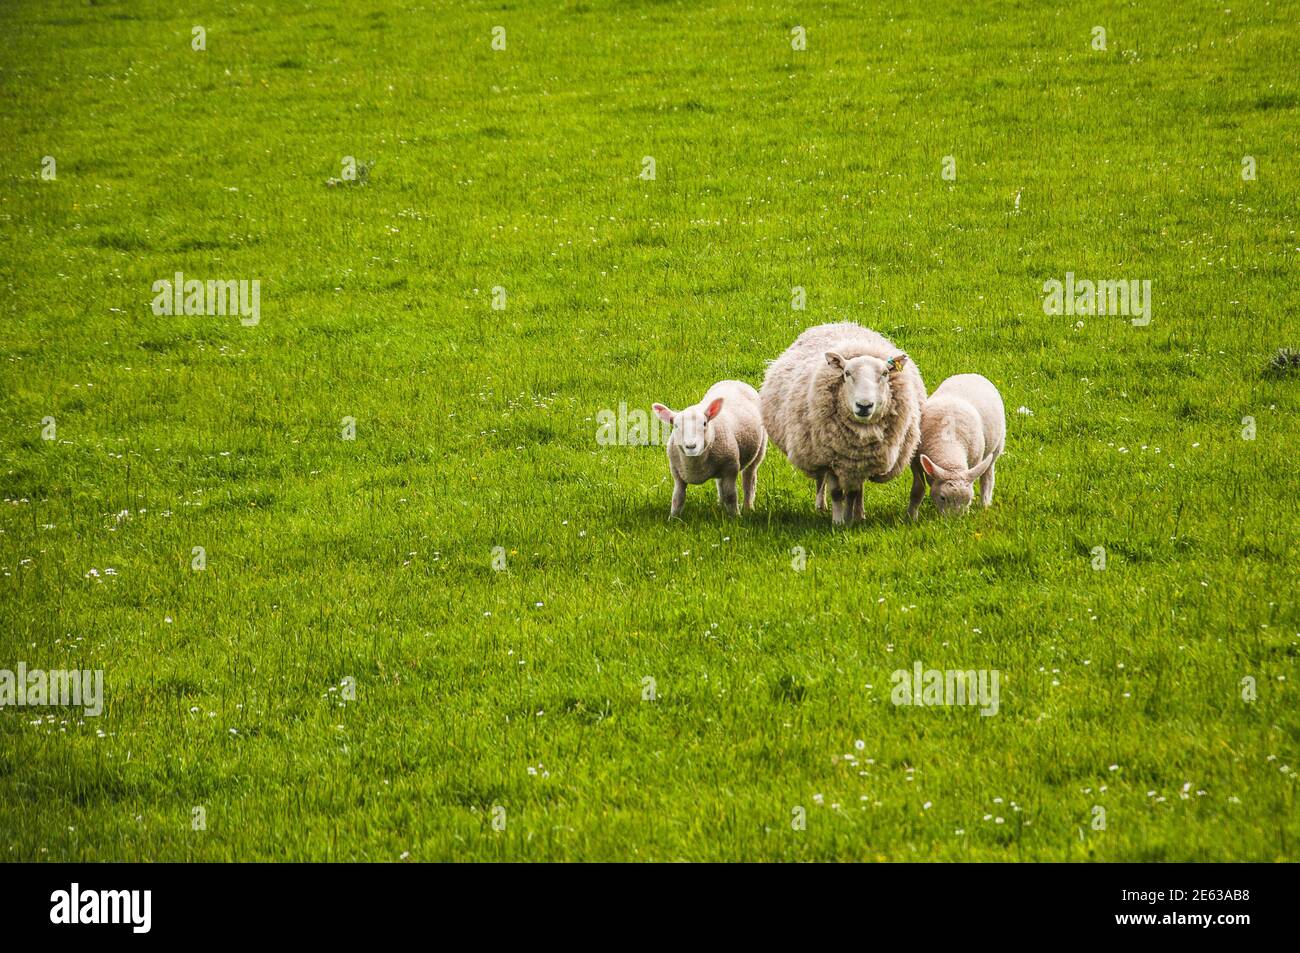 Sheep with a pair of lambs on a meadow, Scotland. Concept: animal life, national symbol, life on farms, wool production Stock Photo